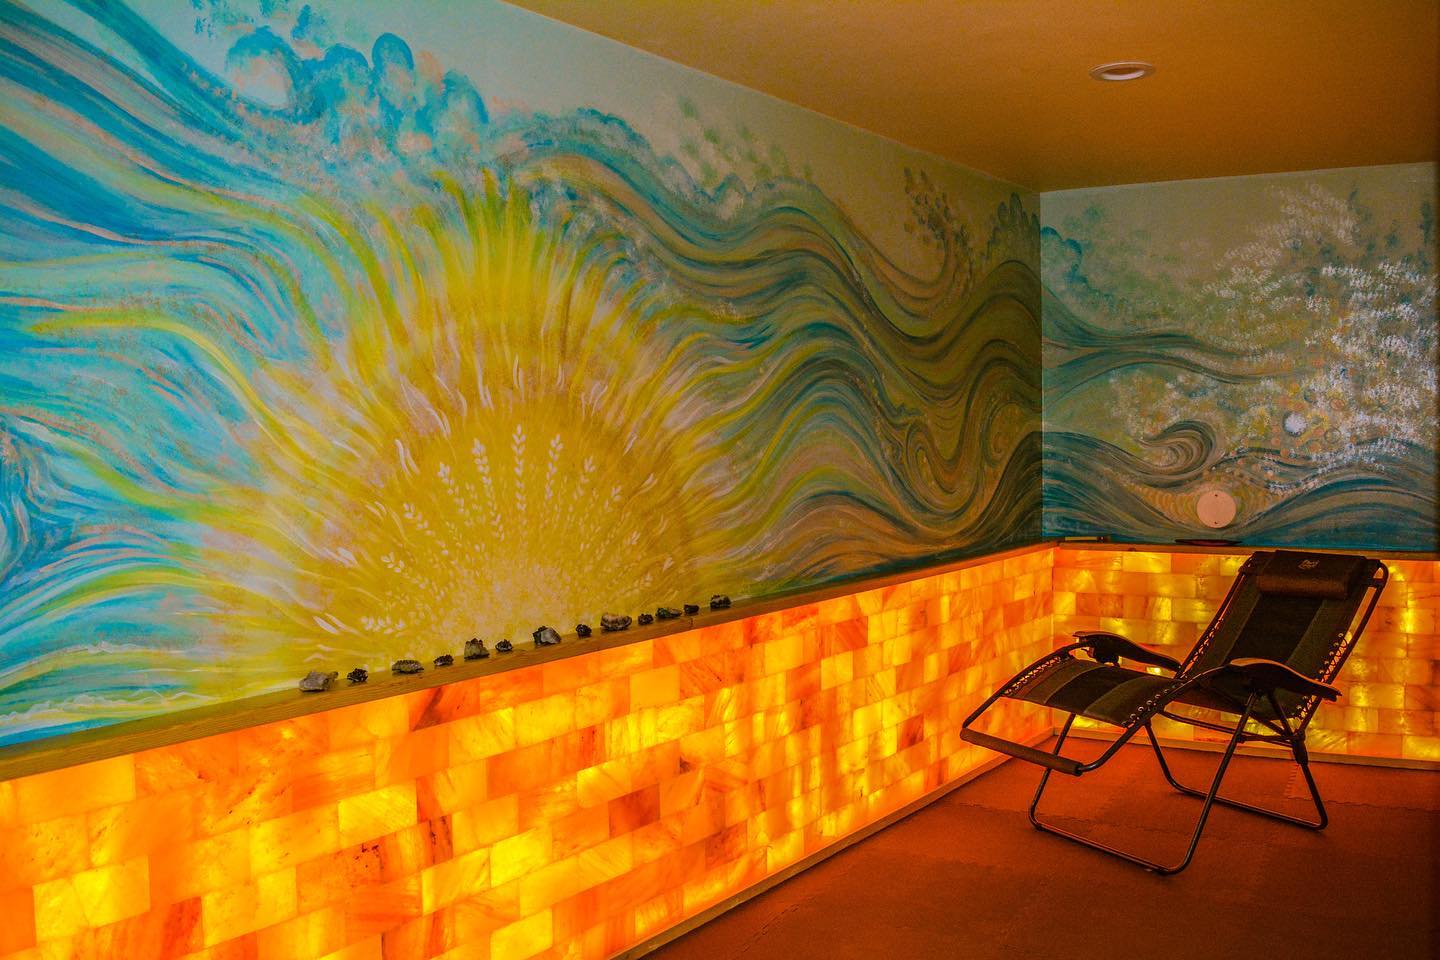 Reclining Chair In Surrounded By A Led Backlit Salt Panel And Decorative Wall At The Bewell Marquette - Marquette, Michigan.